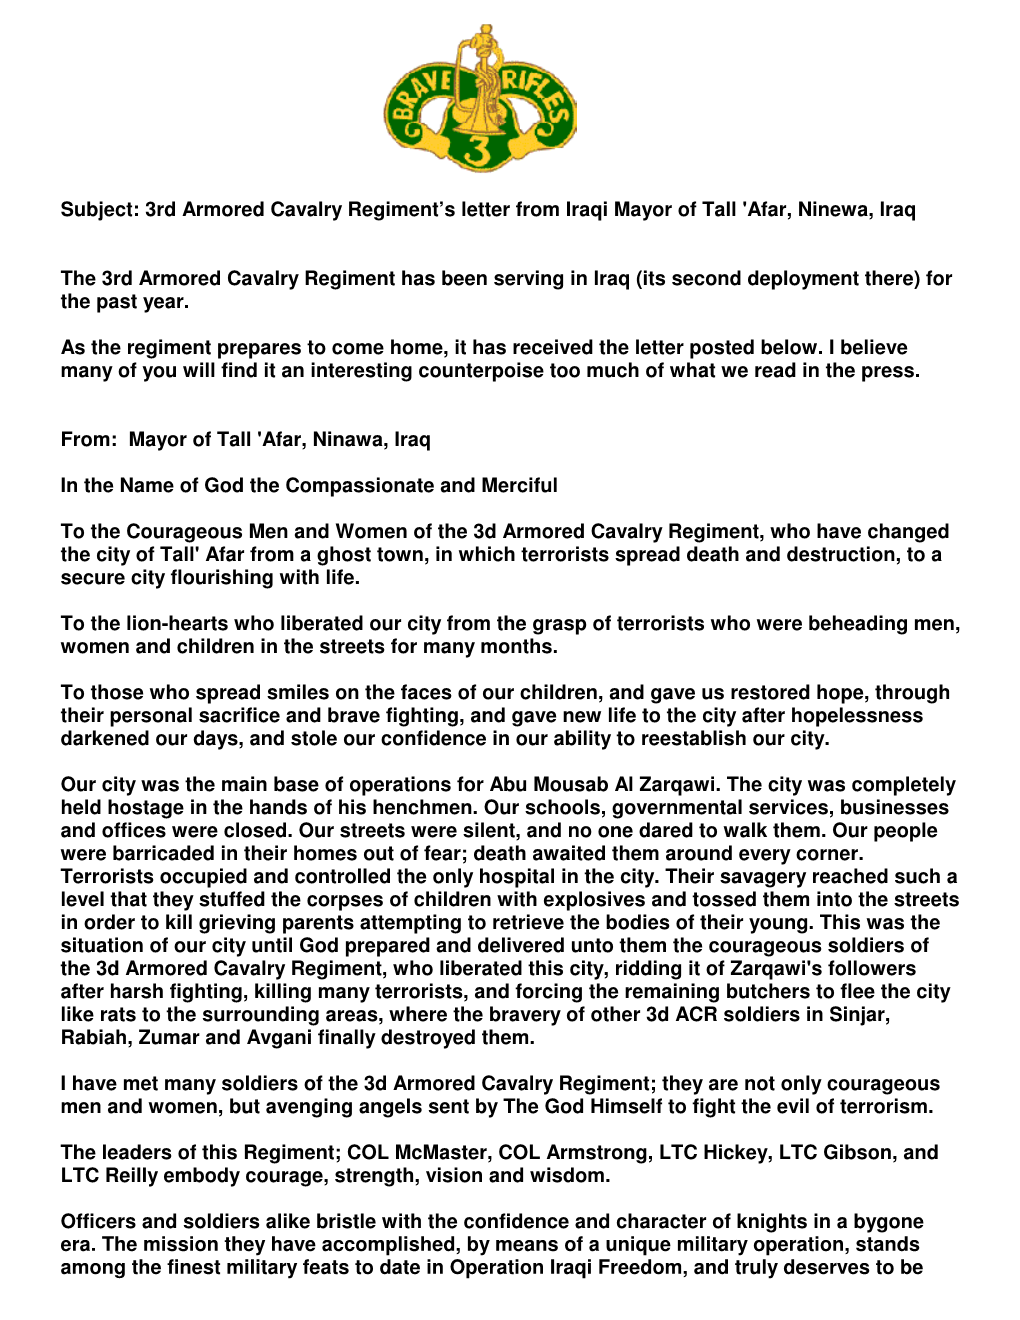 3Rd Armored Cavalry Regiment's Letter from Iraqi Mayor of Tall